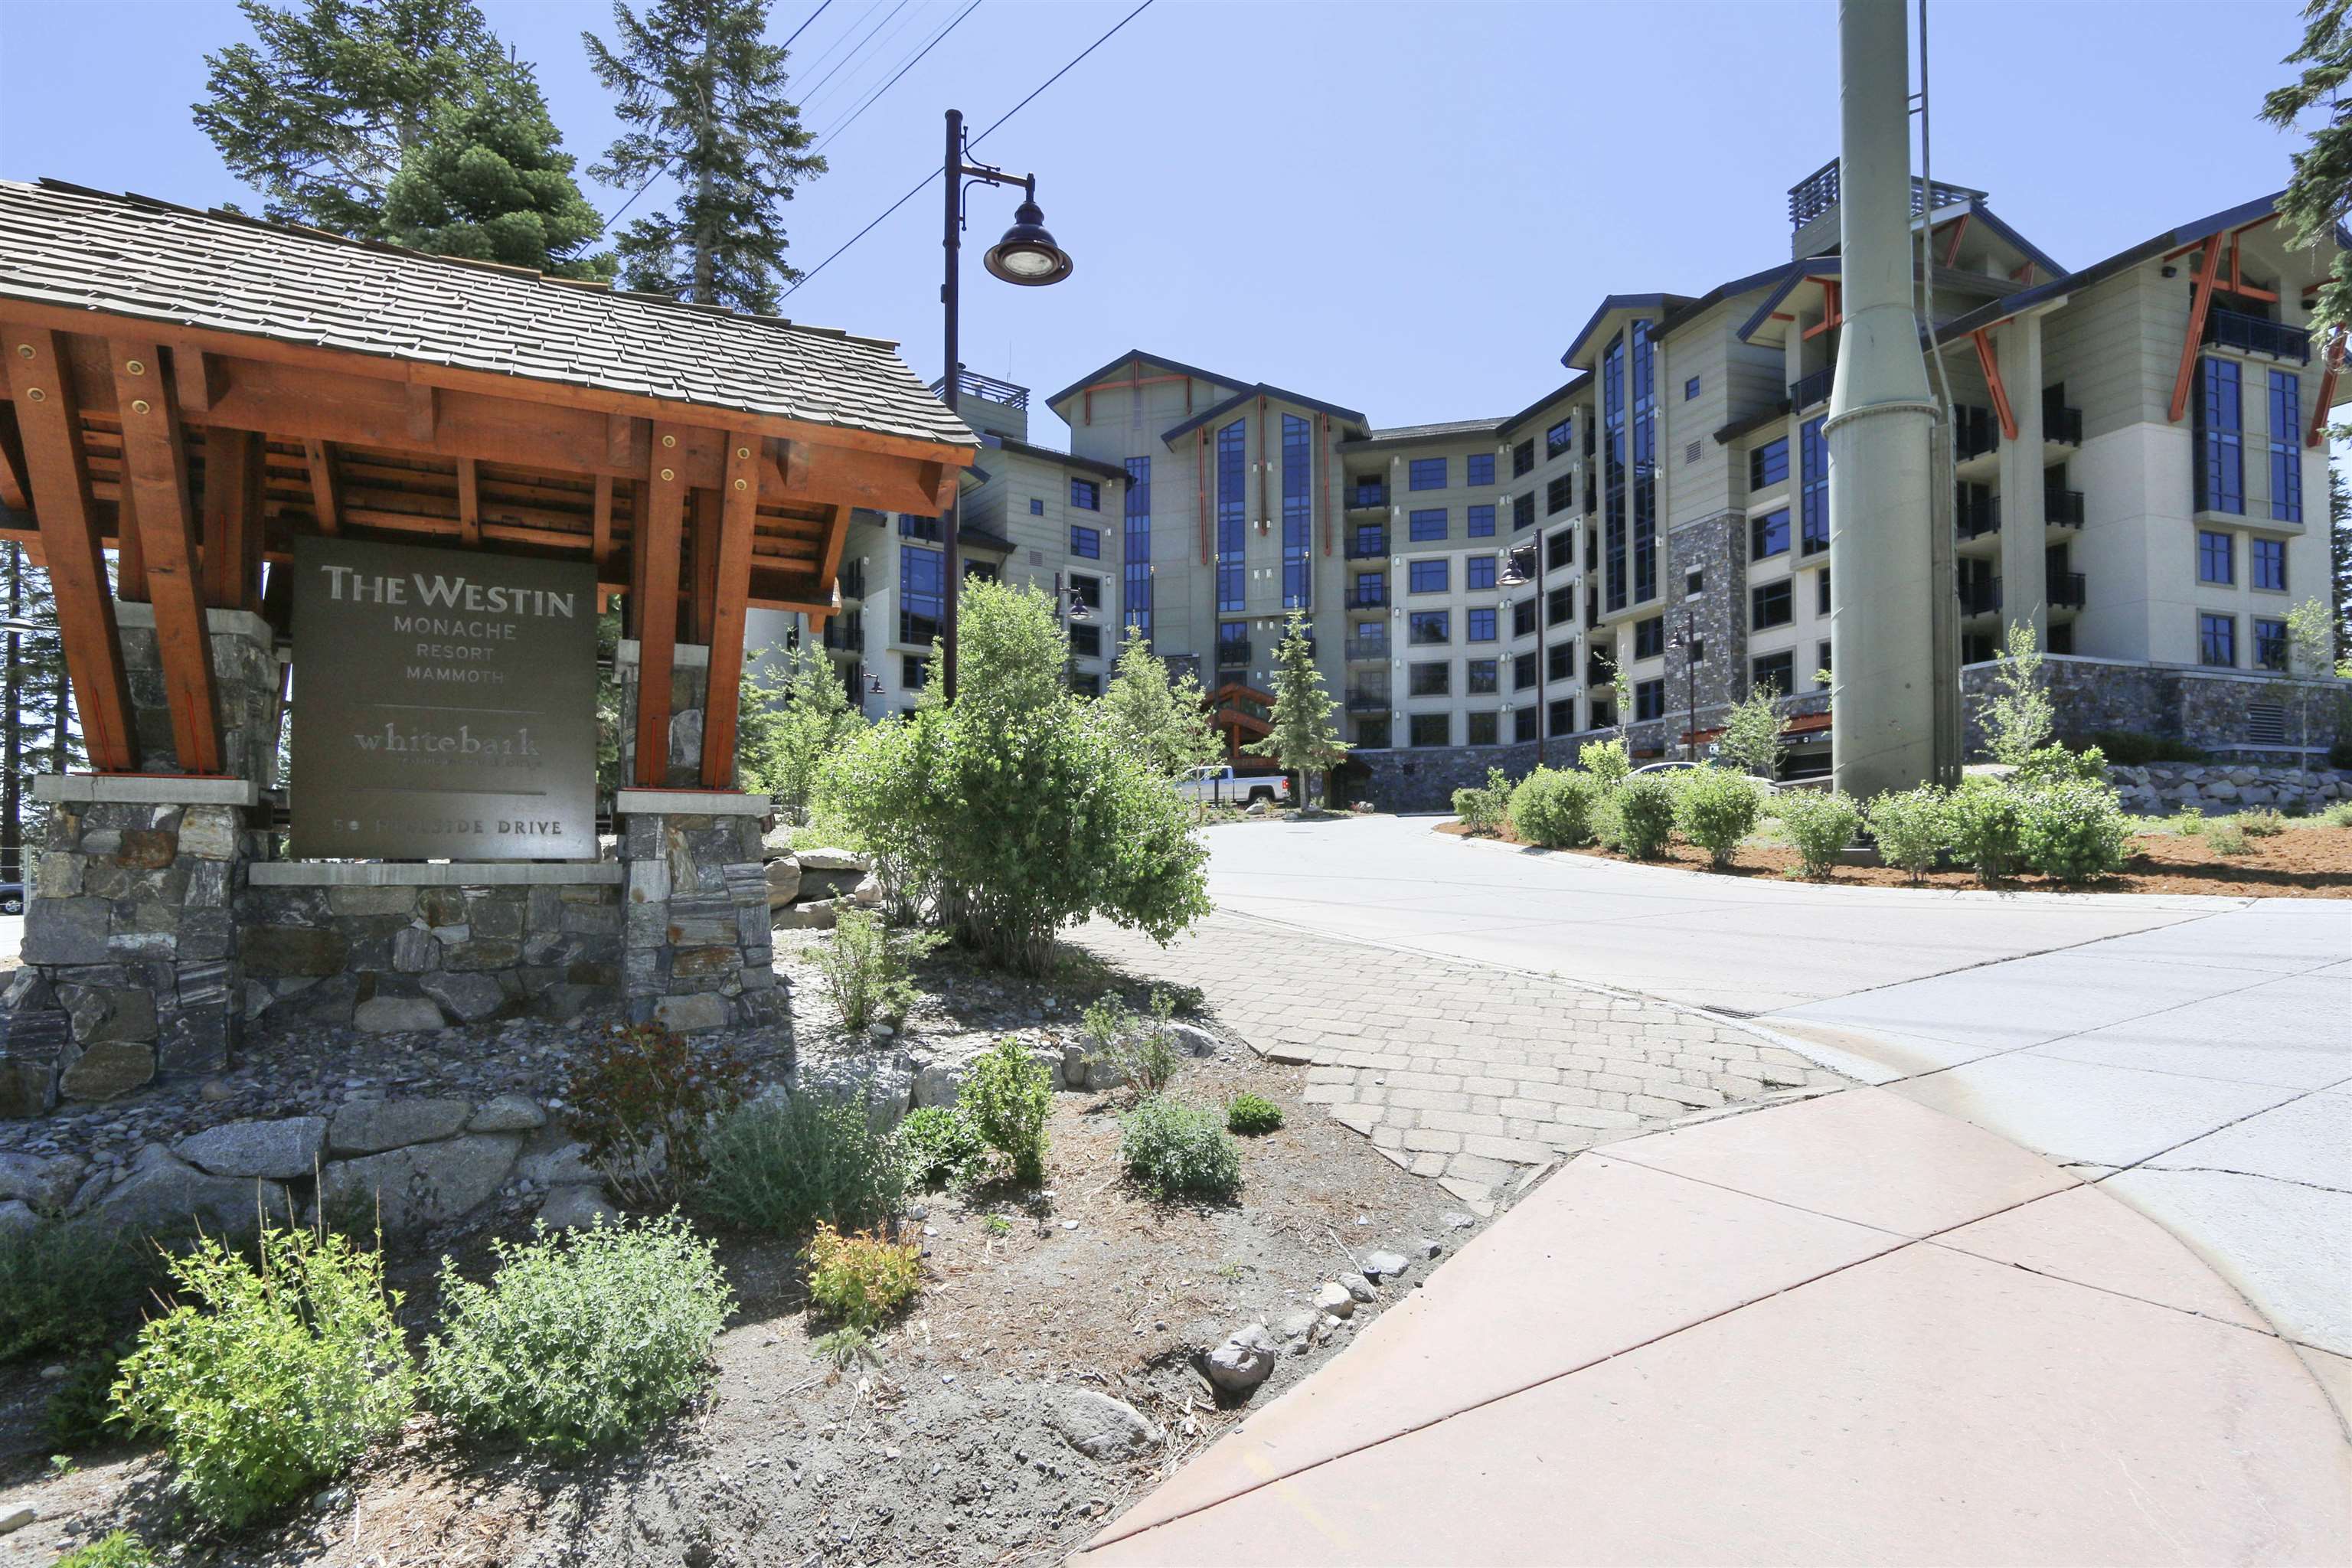 Newly "refreshed" 1 bedroom / 1 bath at The Westin Monache. Fourth floor location overlooking the entry with views of the Village Gondola and The Knolls. This location is close to the elevator bays. The unit is completely modernized to the latest Westin standards. This is Mammoth's premier lodging facility located just above the Village proper with great access to the Village Gondola for skiing and snowboarding, all of the shops, restaurants and bars of the Village and periphery and all of the special events held during the summer and winter in the Village Plaza. These units have high occupancy and may be difficult to actually enter. Seller has custom seat cushions for the metal deck chairs. Check out the video tour.